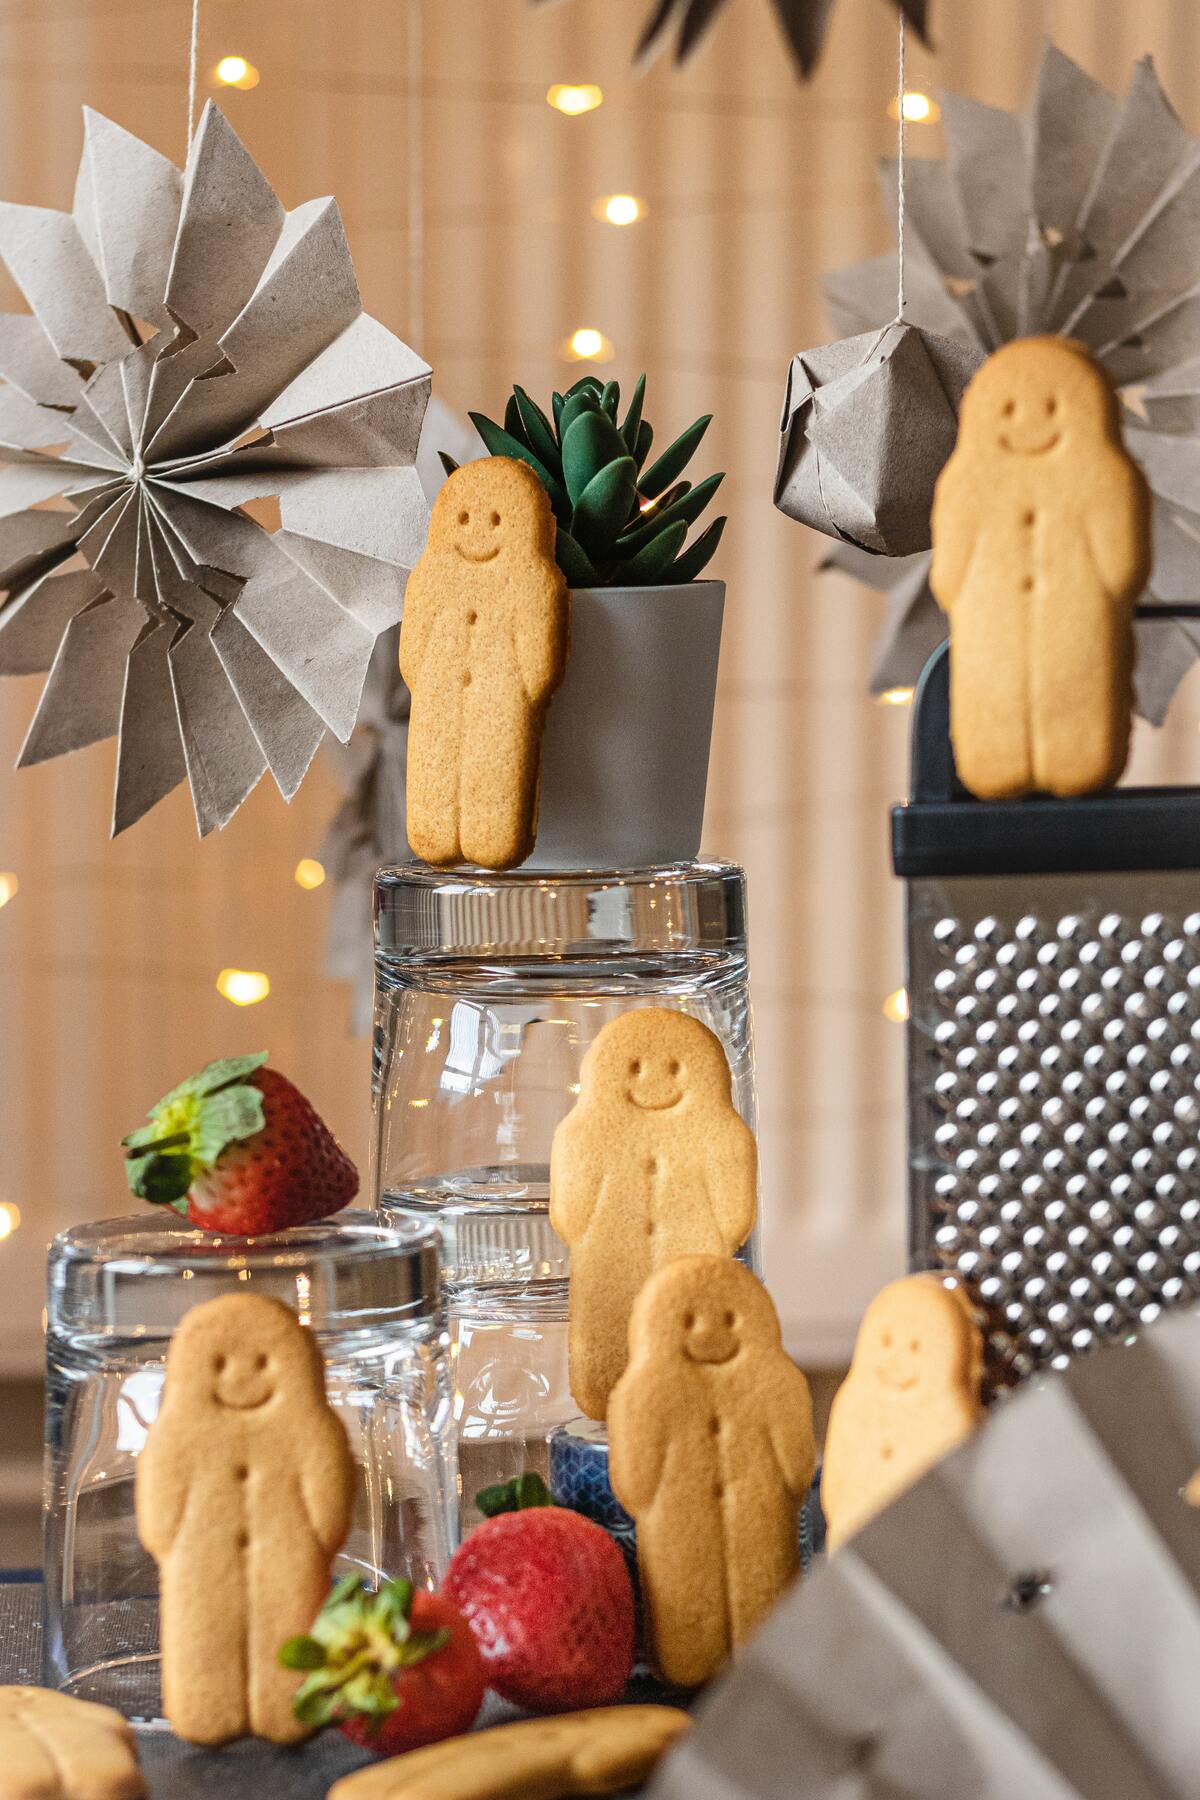 Edible ornaments are a fun and creative way to decorate